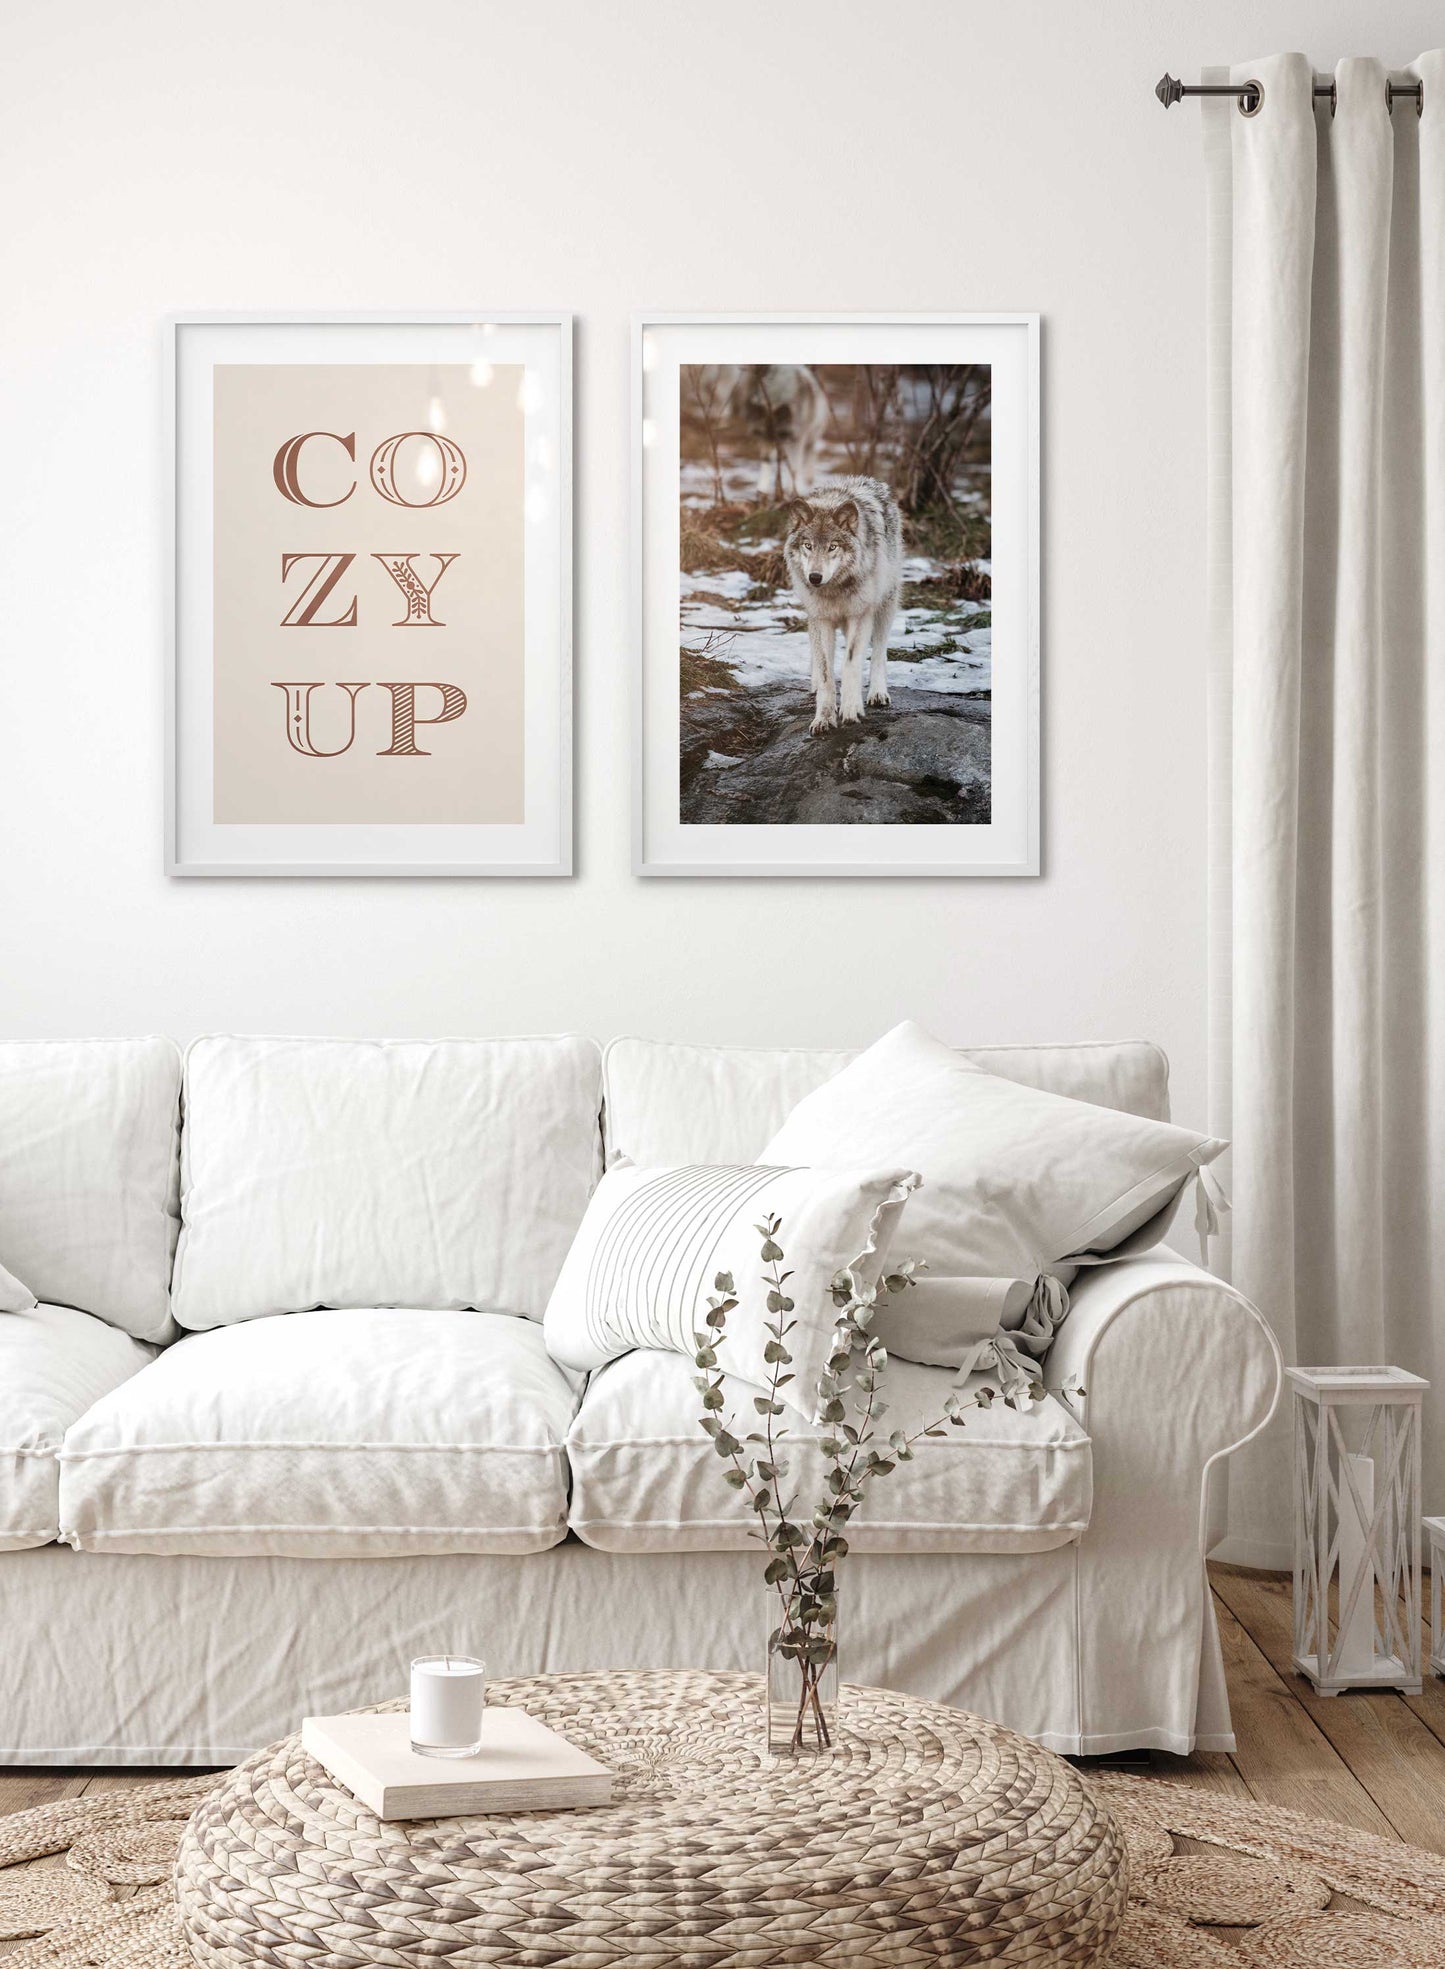 Cozying Up, Poster